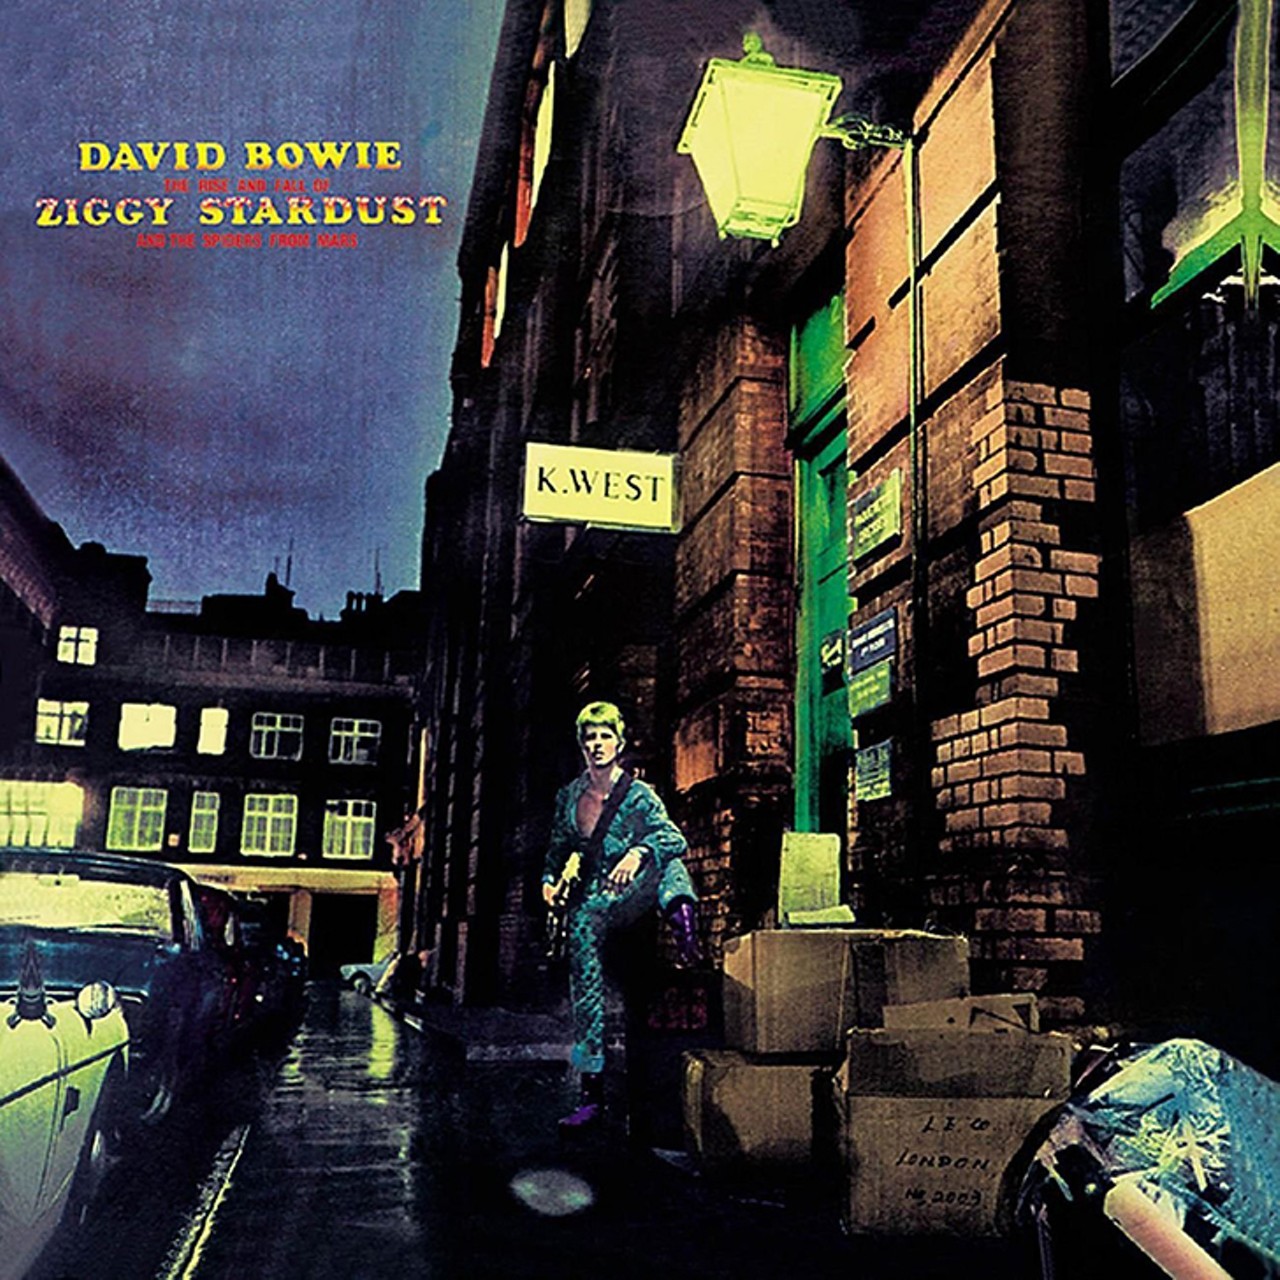 Friday, May 6Classic Albums Live: David Bowie's The Rise and Fall of Ziggy Stardust and the Spiders From Mars at Hard Rock Live